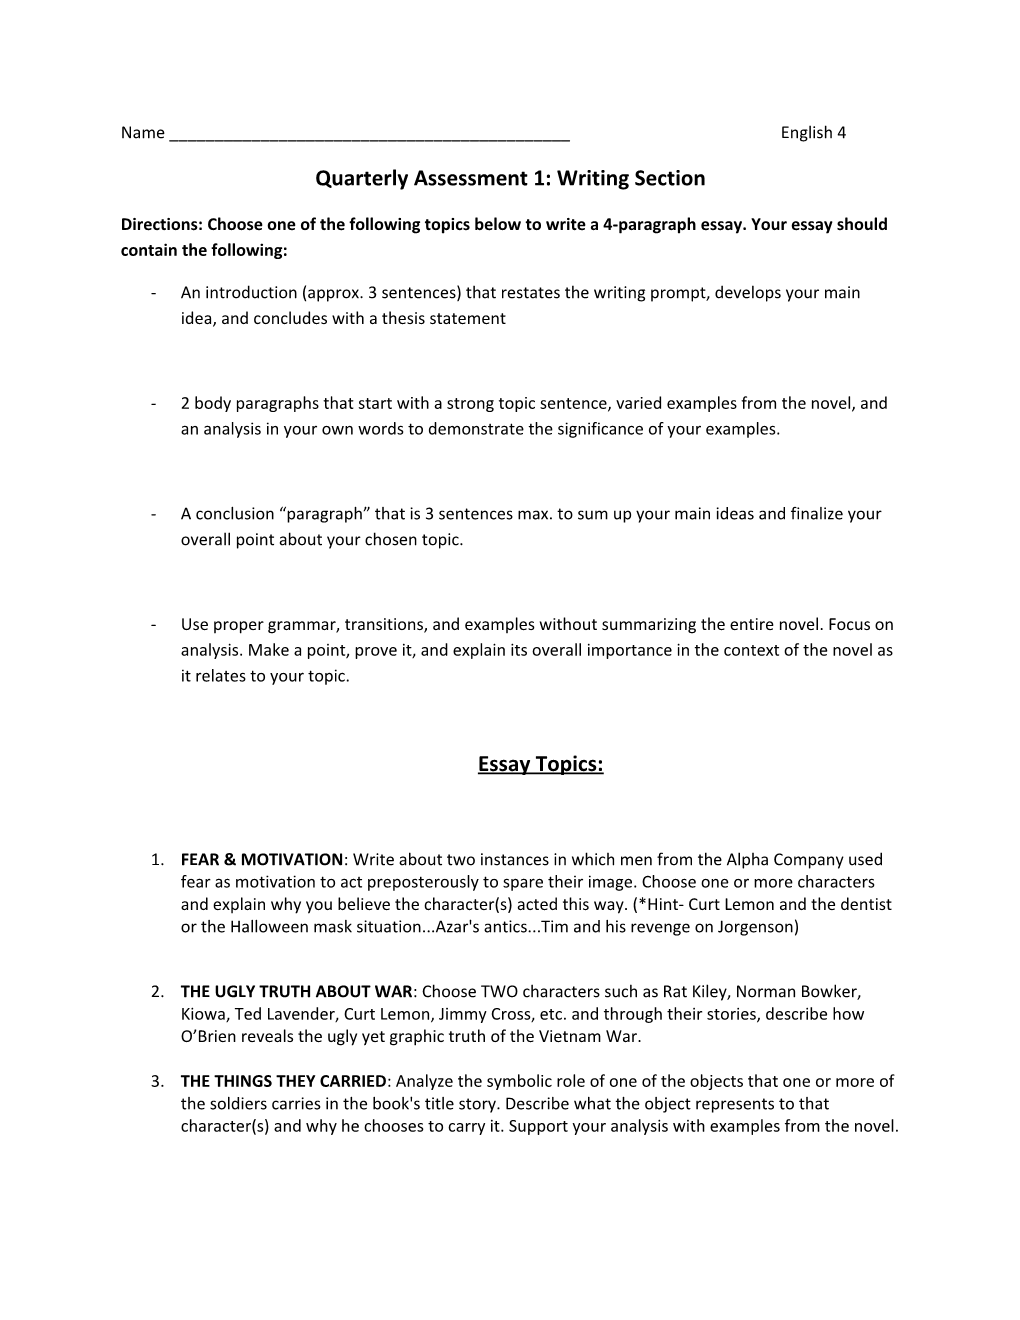 Quarterly Assessment 1: Writing Section